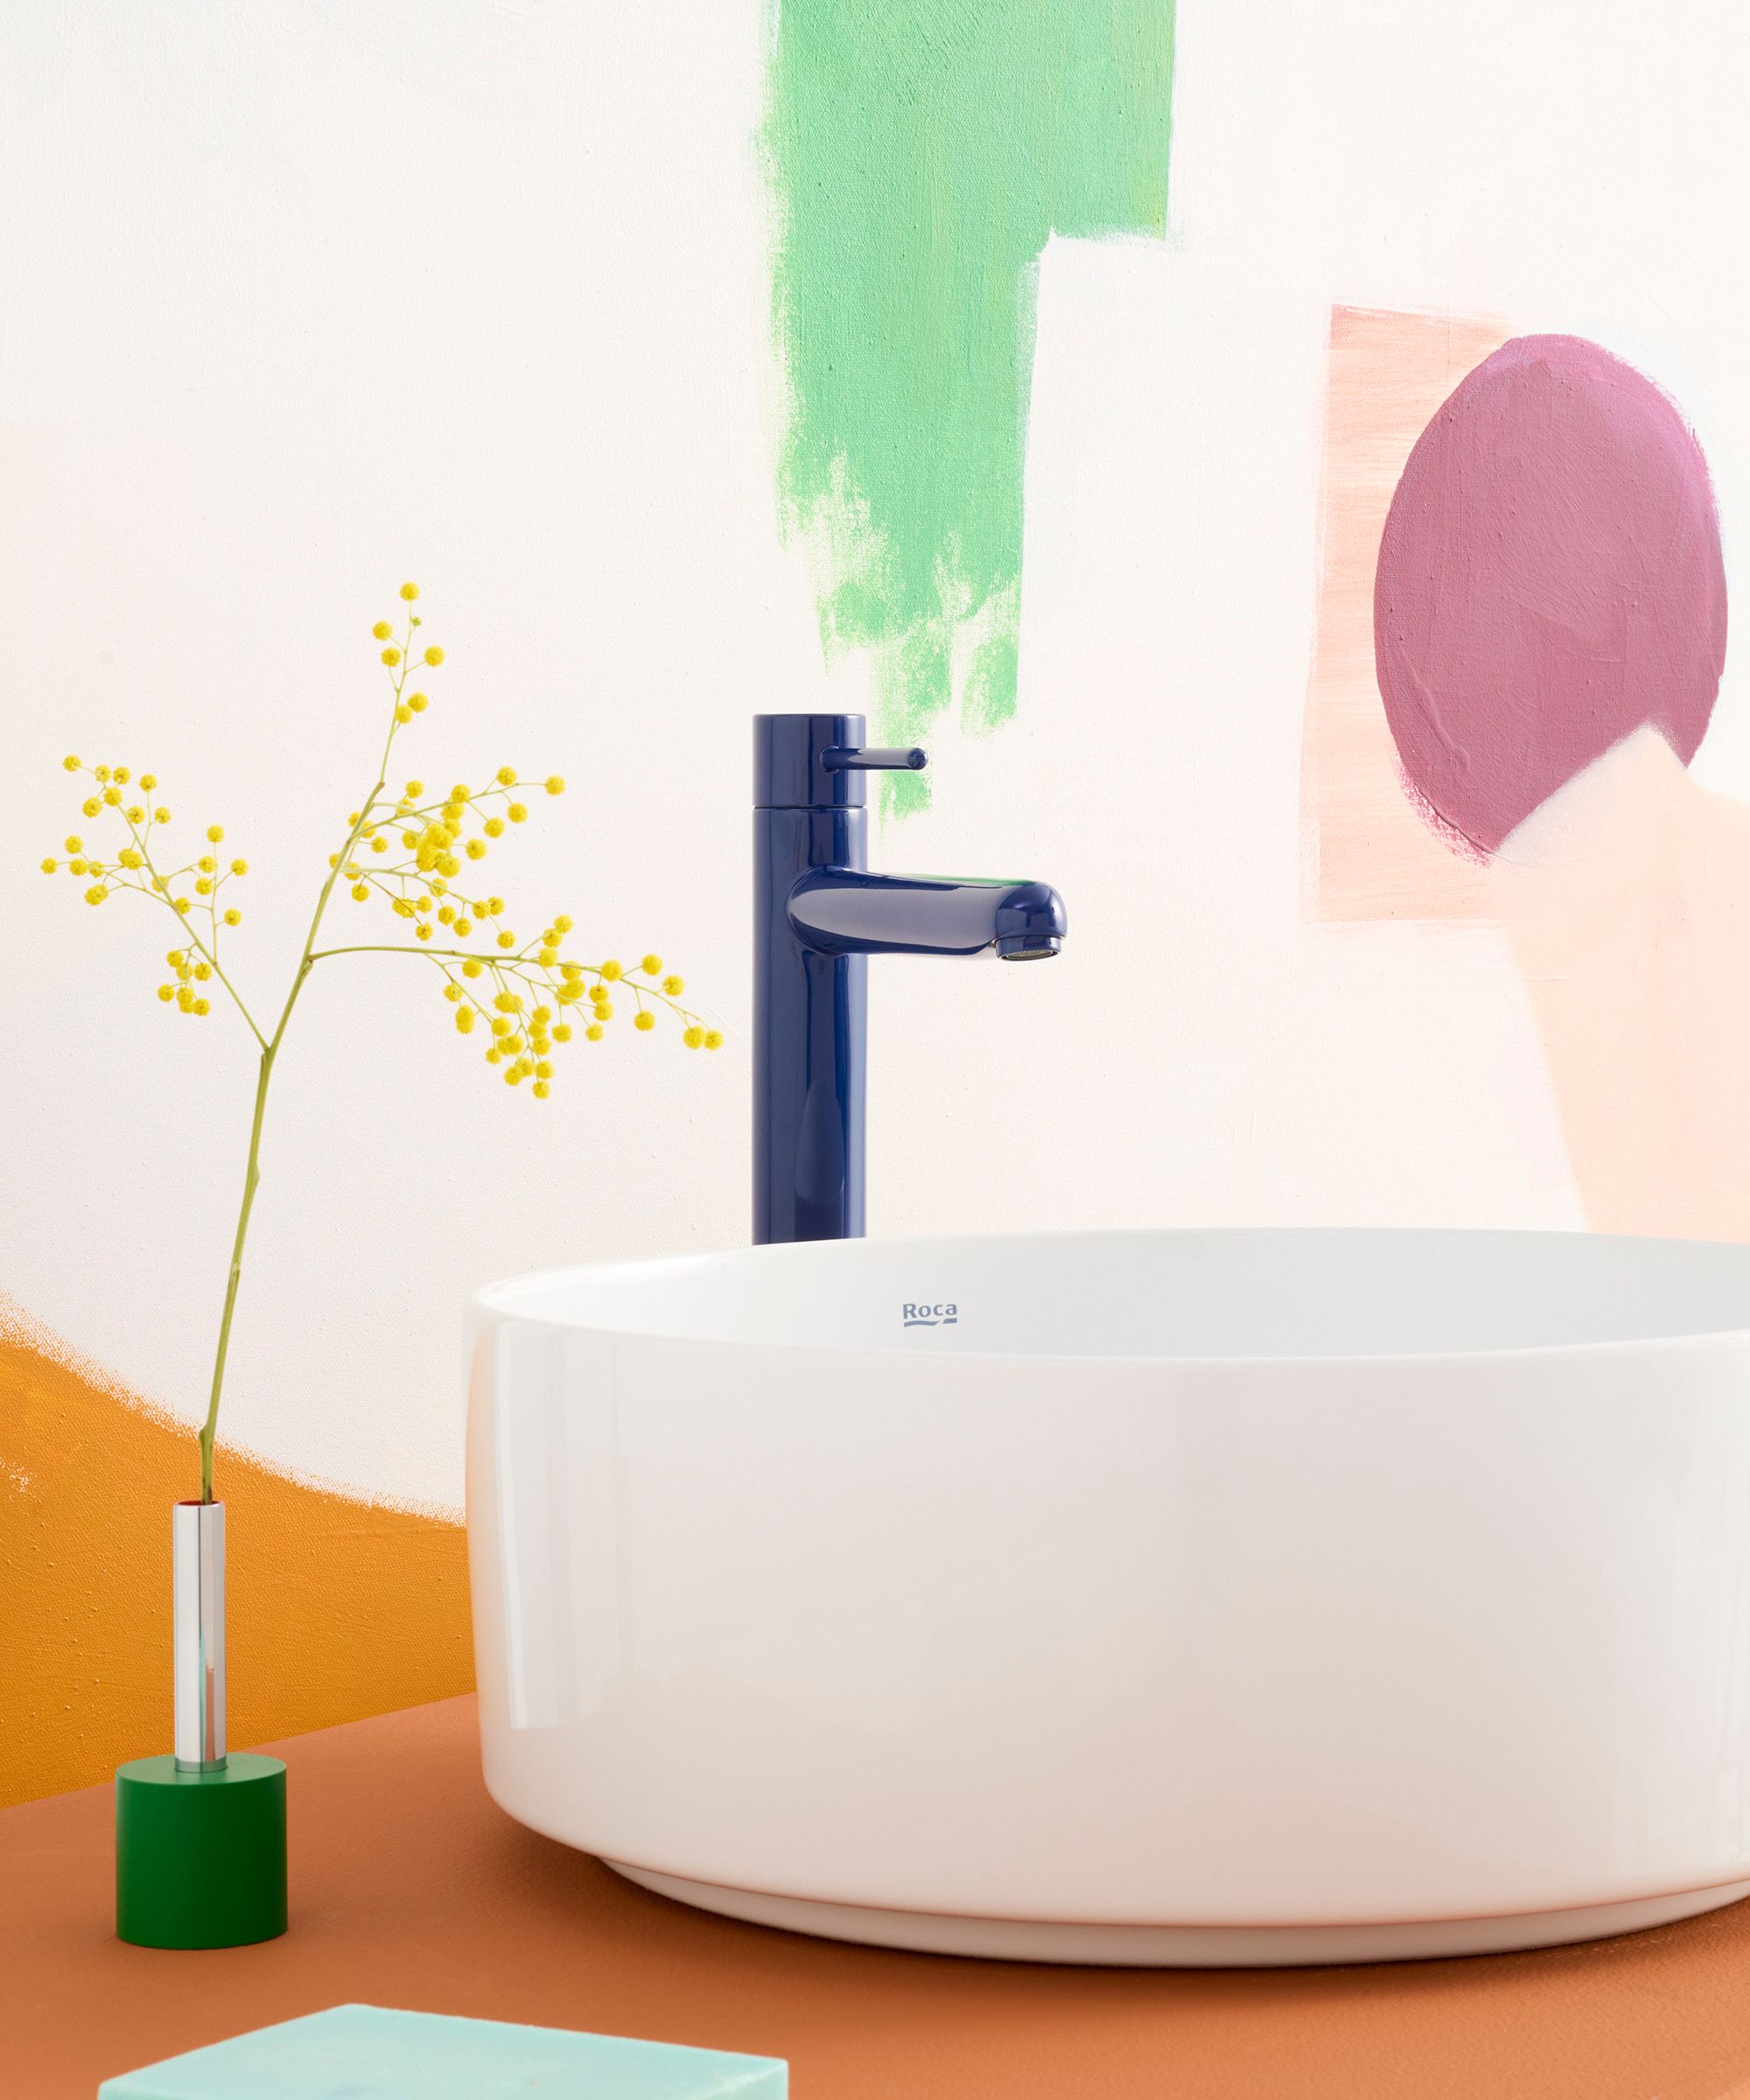 Colorful brassware and textured surfaces are the unexpected bathroom